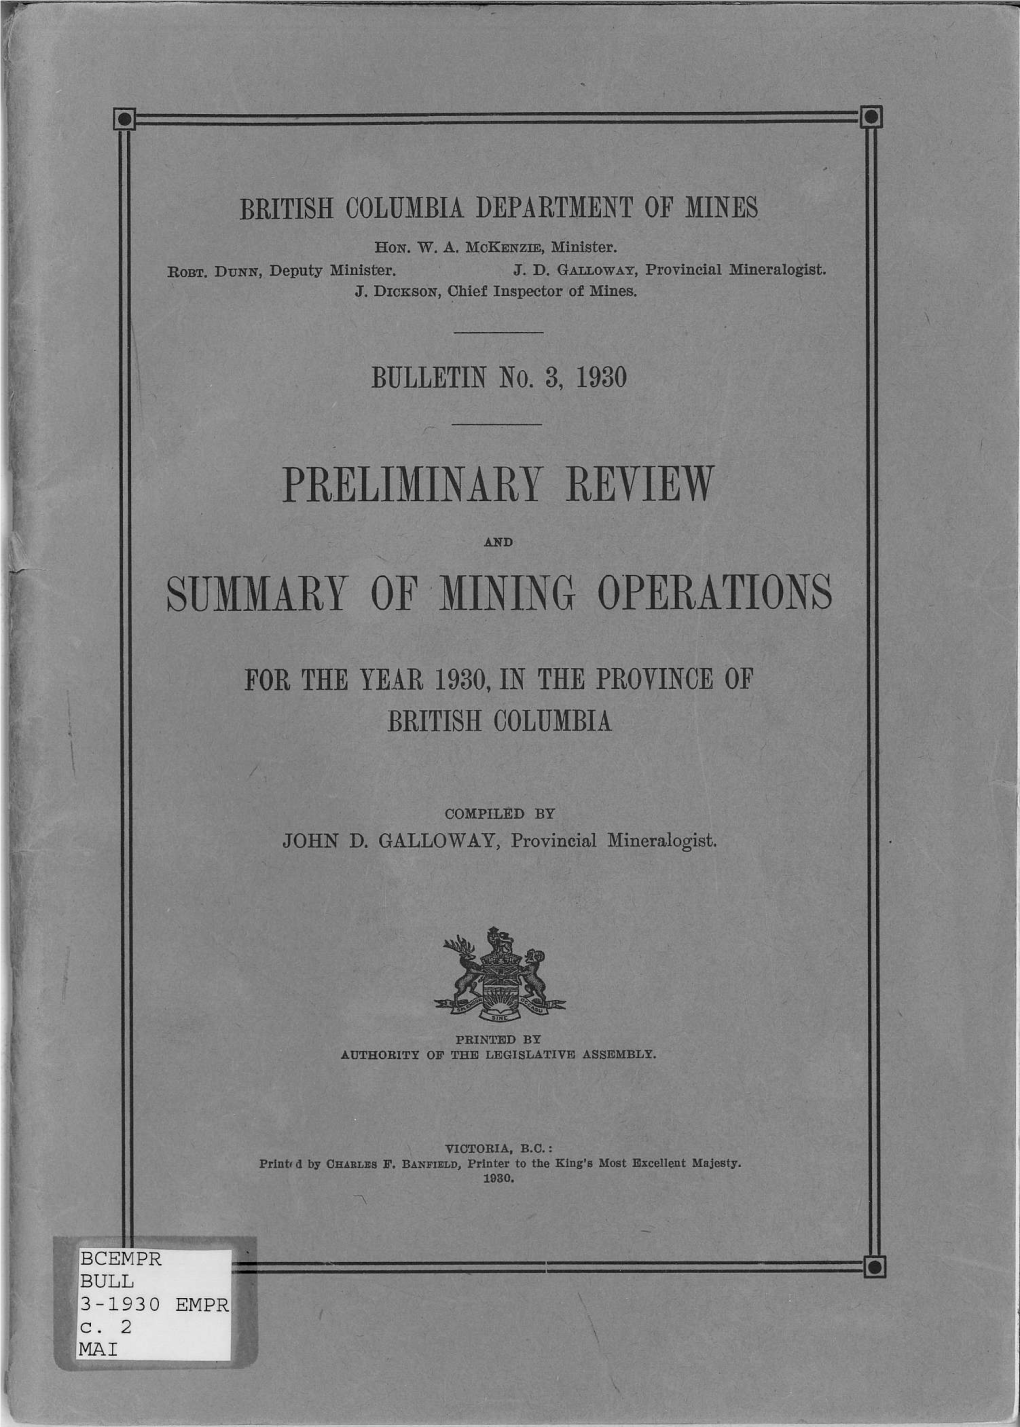 Preliminary Review Summary of Mining Operations